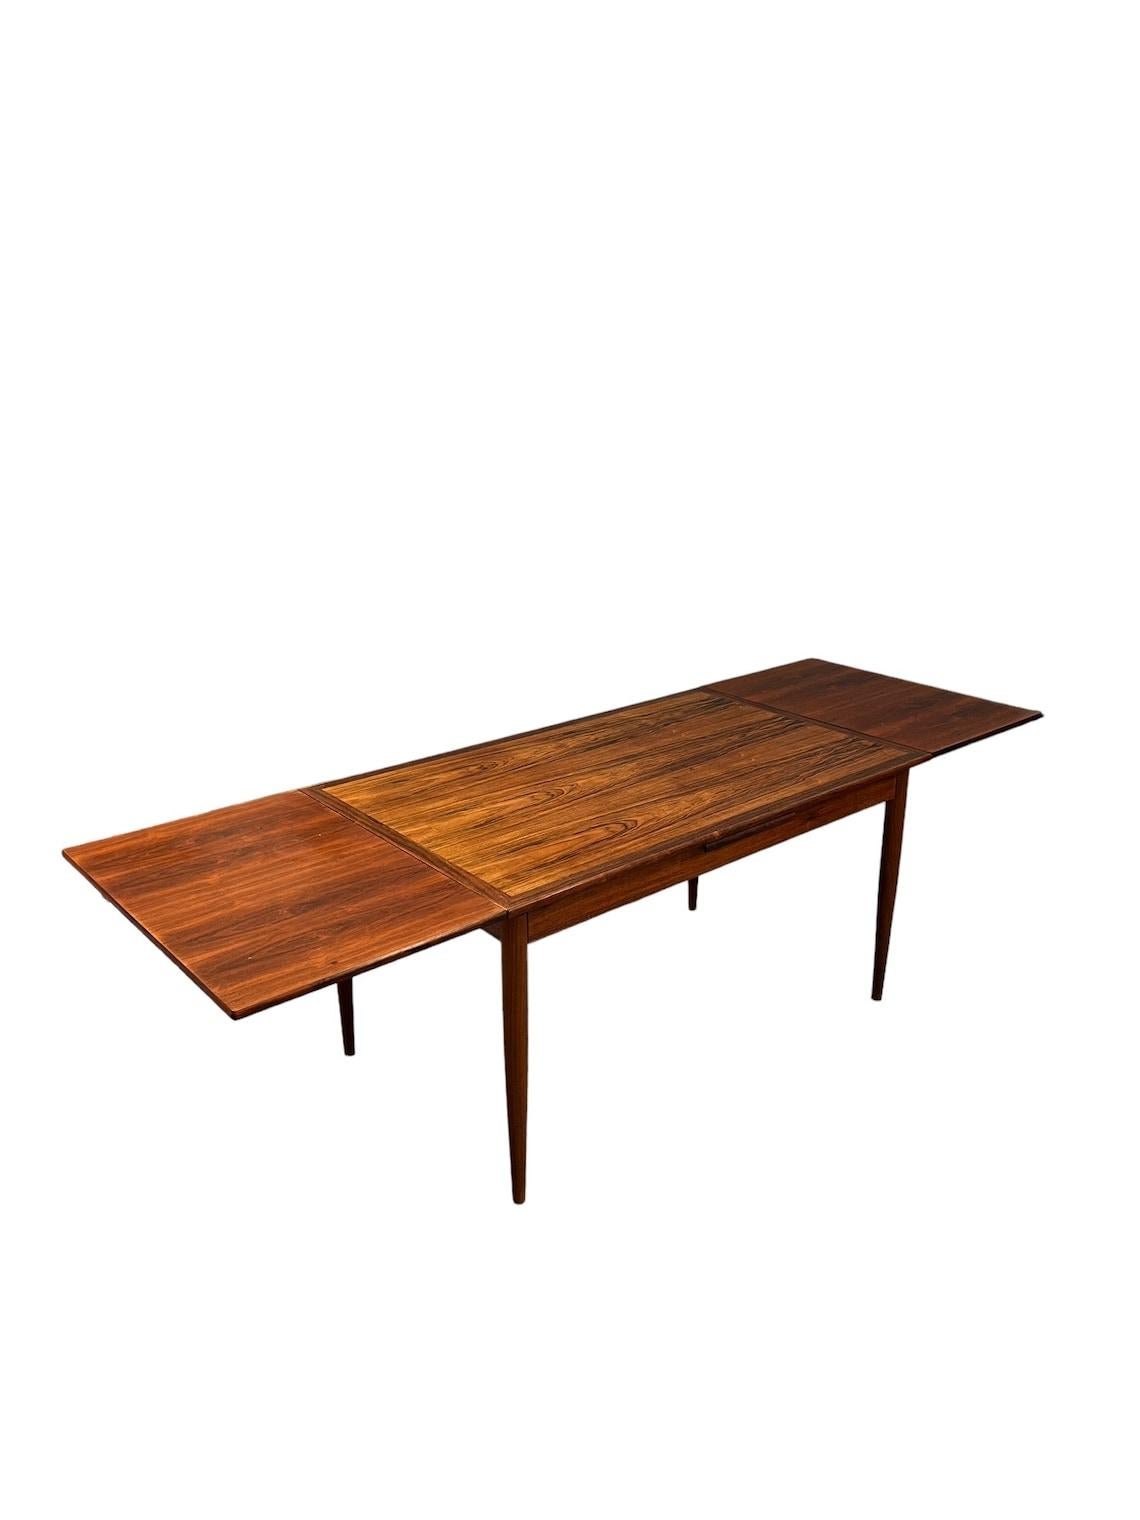 Mid-Century Risewood Dinning Table w/ 2 inner Leaf. L55.5 x D33.5 x H29.5 inches each leaf 21.5 inches on each side total length when fully opened 98.5 inches 